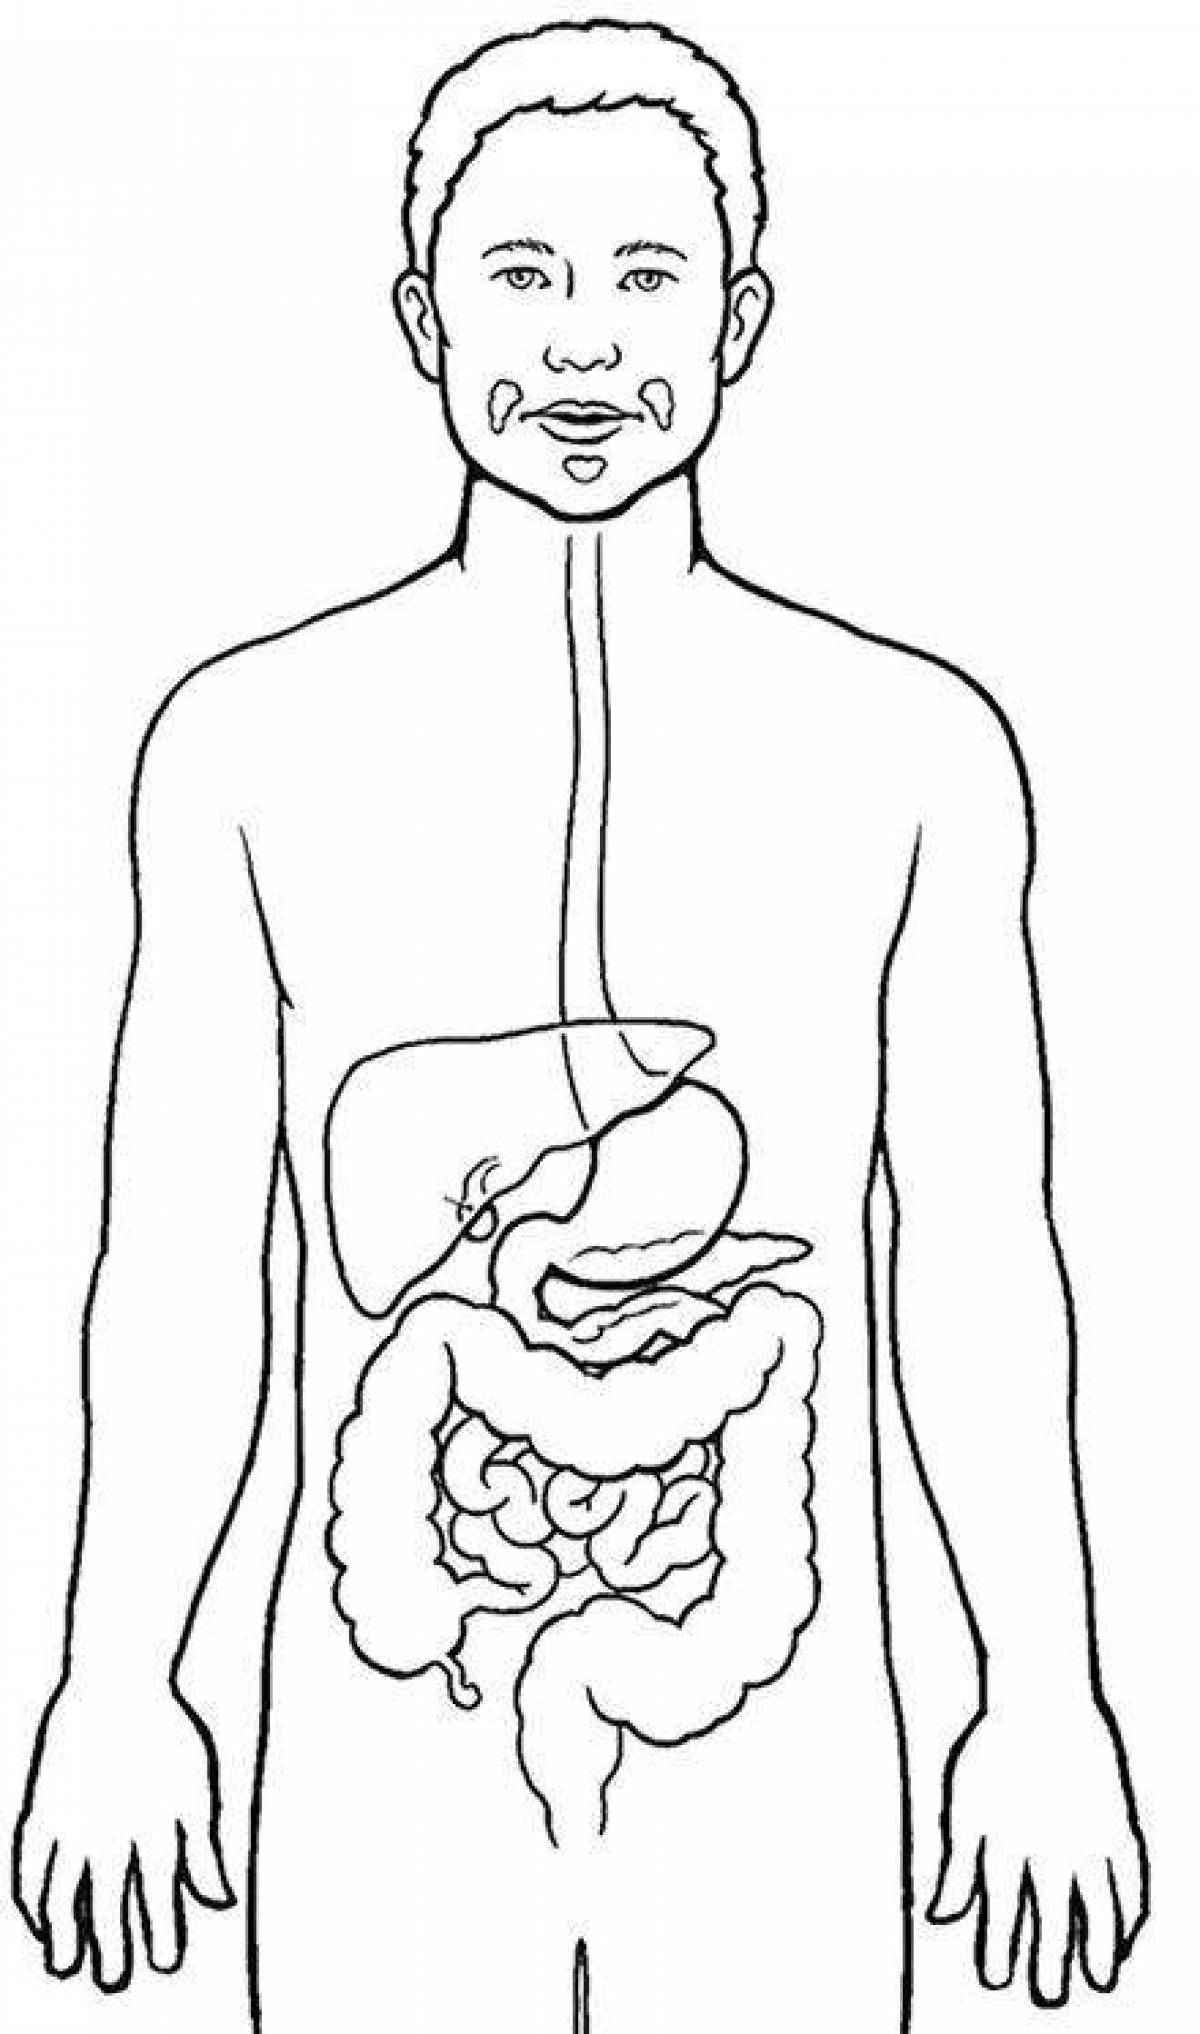 Detailed digestive system coloring page